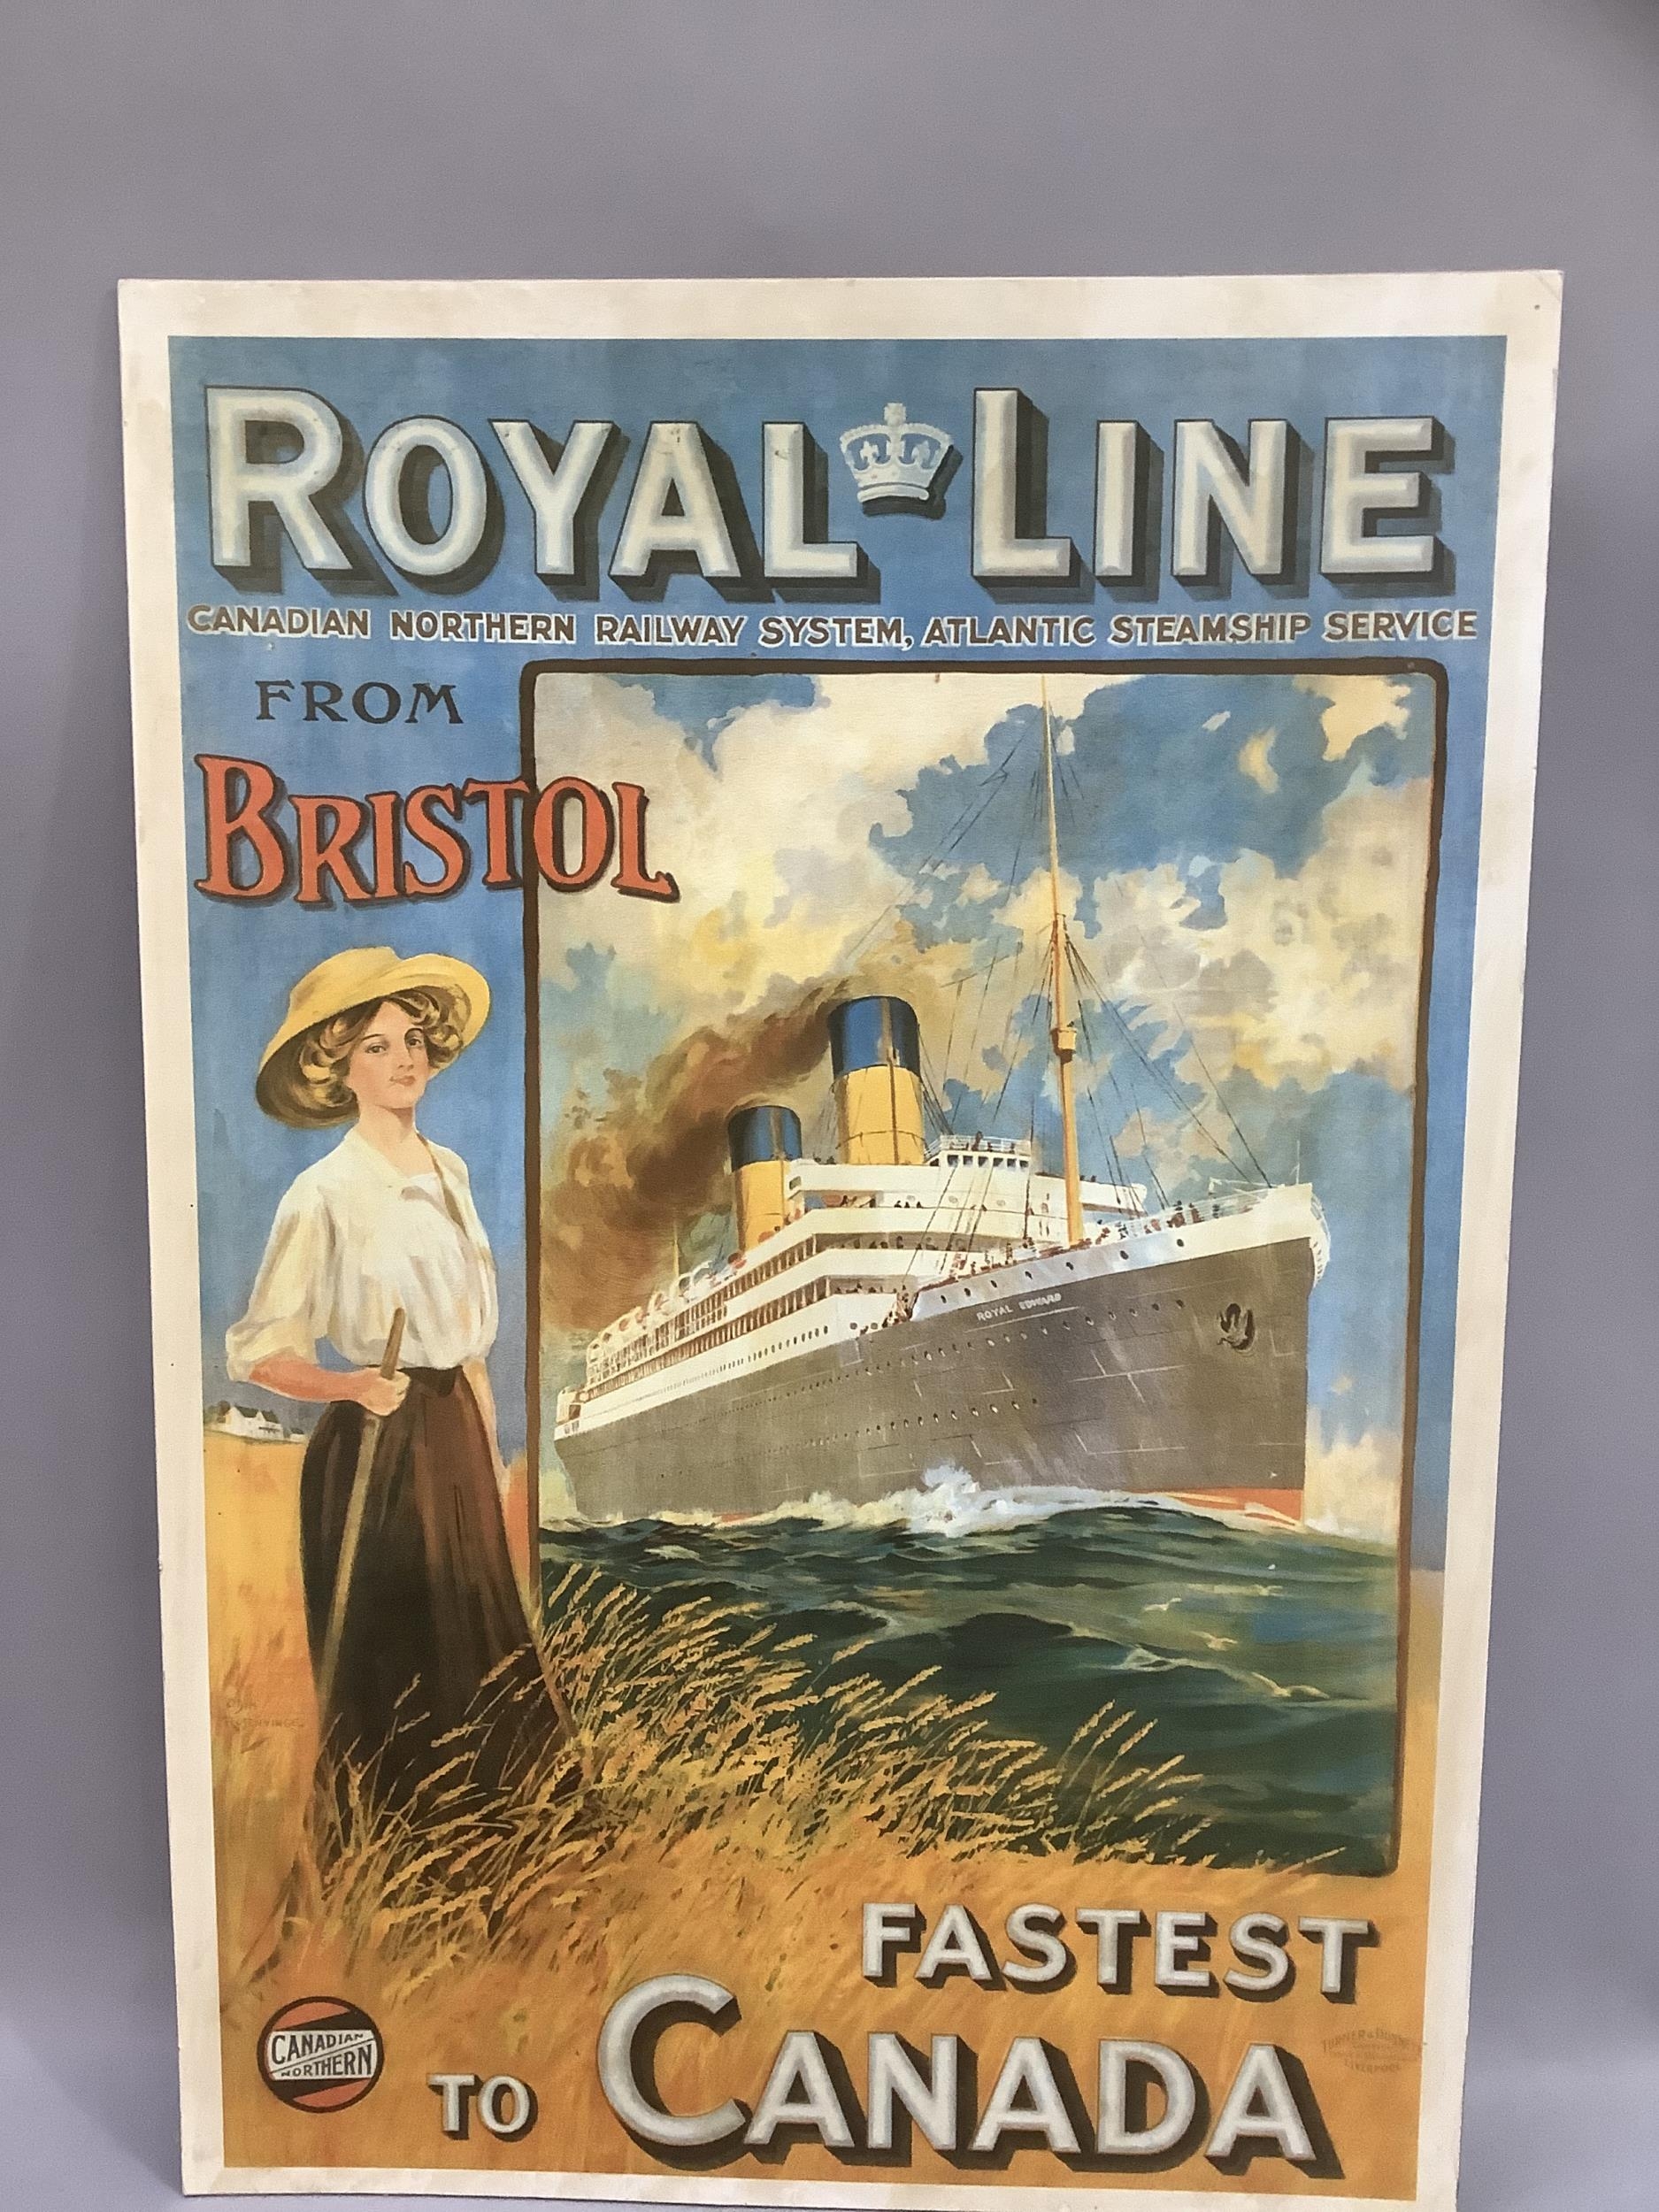 Advertising poster, Royal Line From Bristol Fastest to Canada - Canadian Northern Railway System, - Image 2 of 2